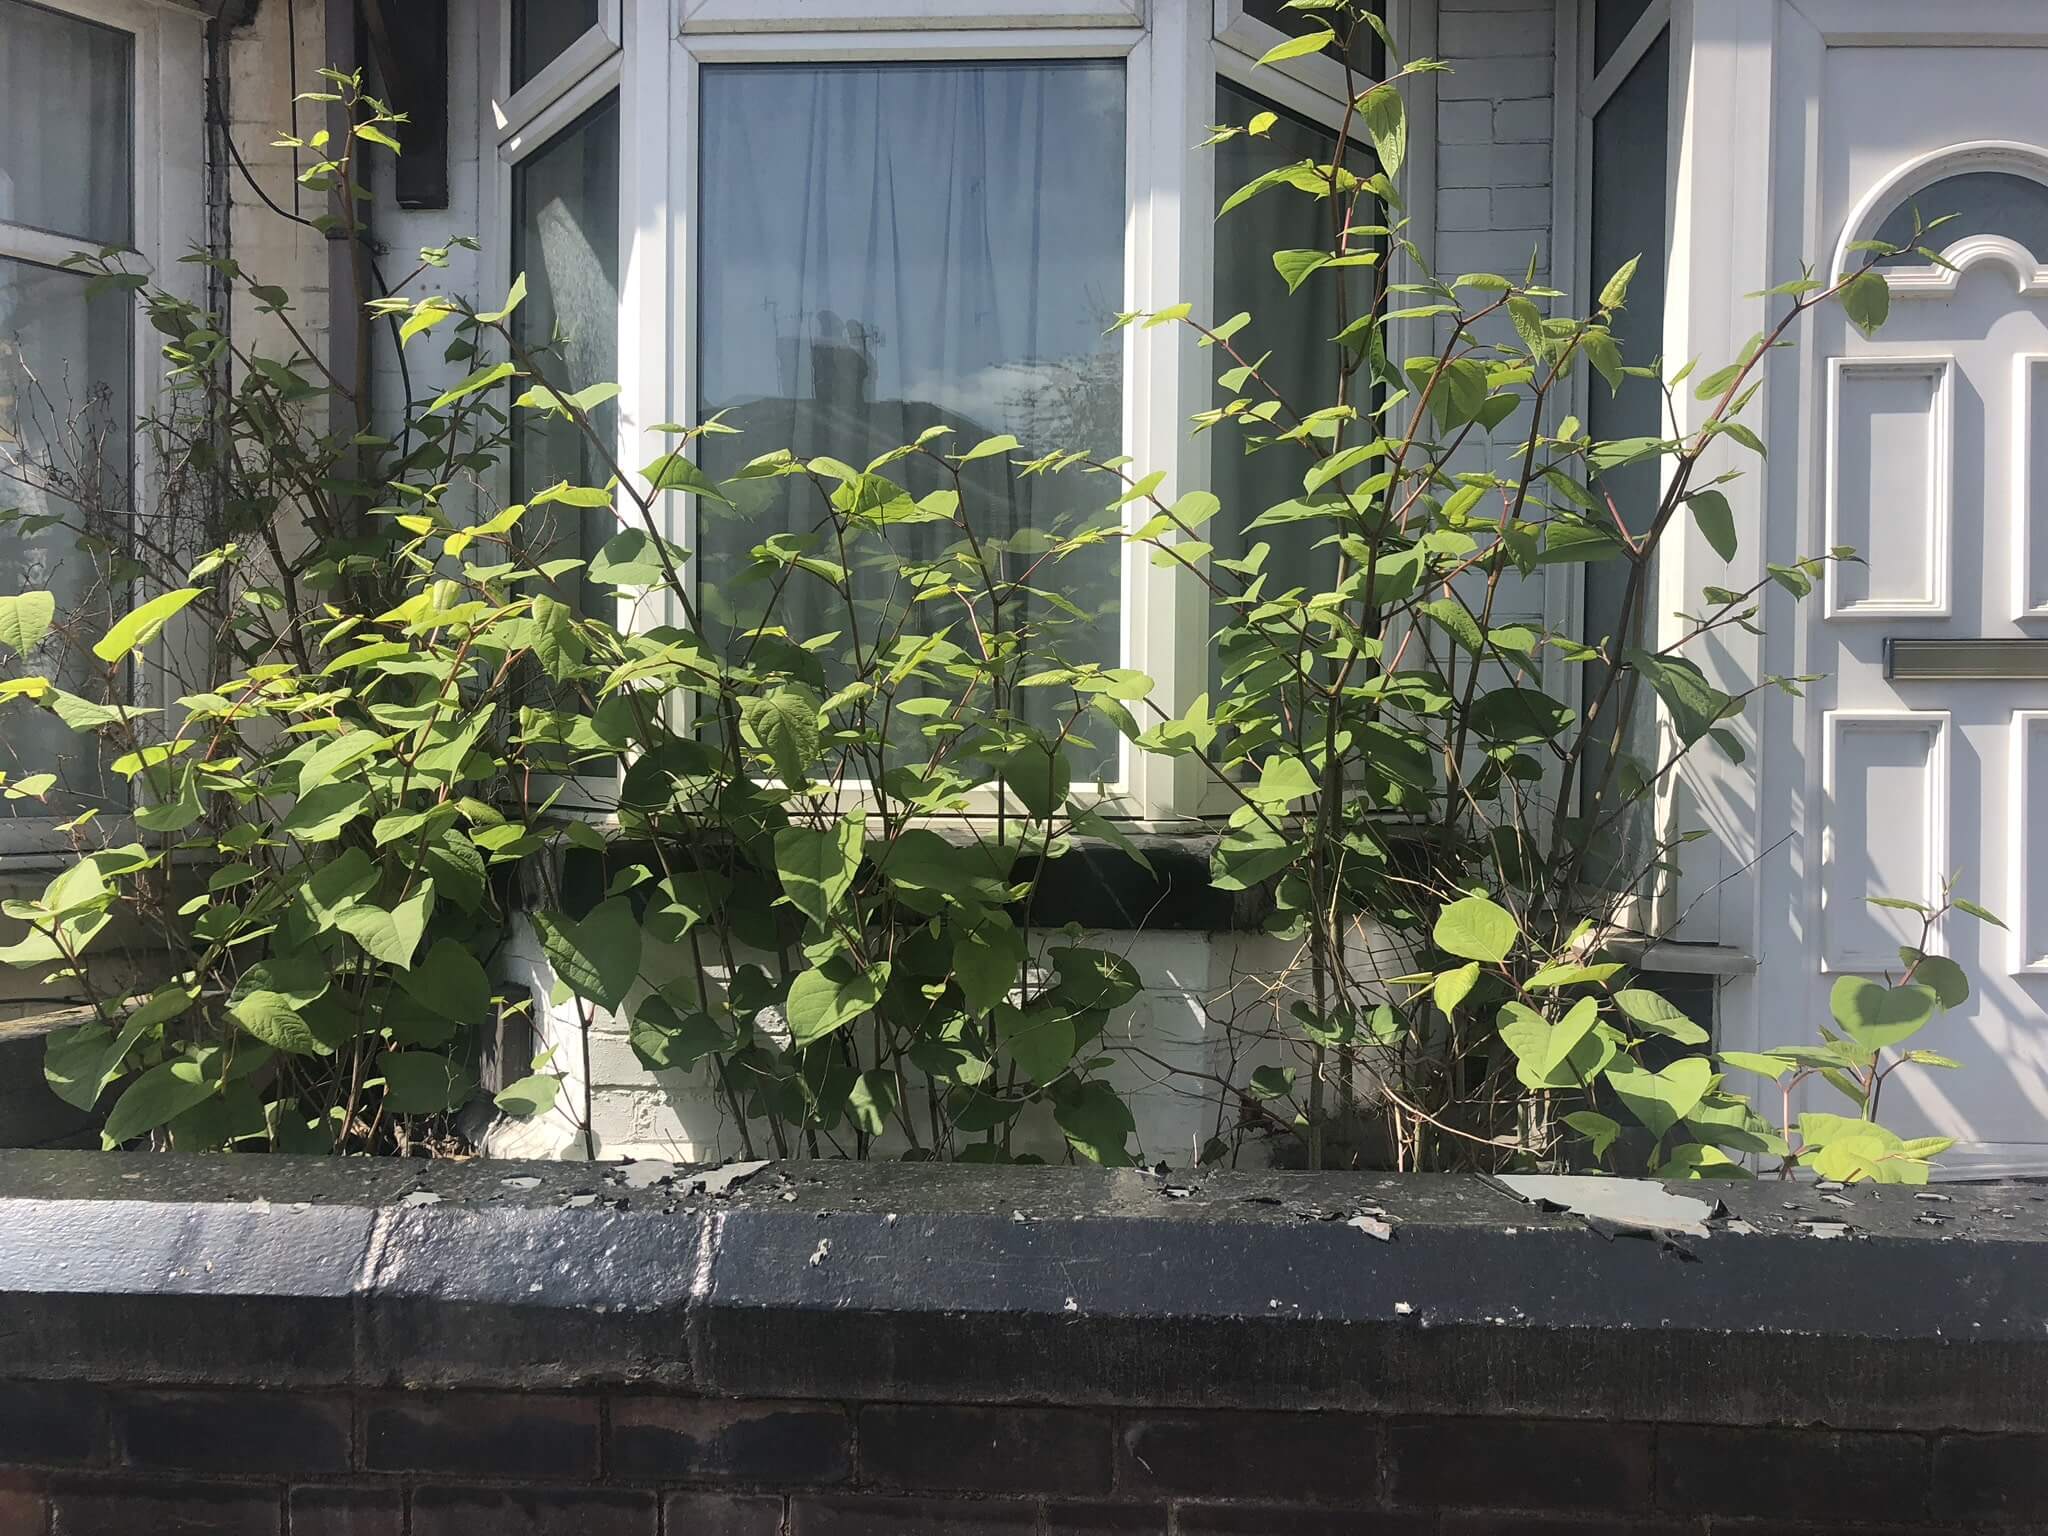 Commercial Japanese knotweed Removal UK